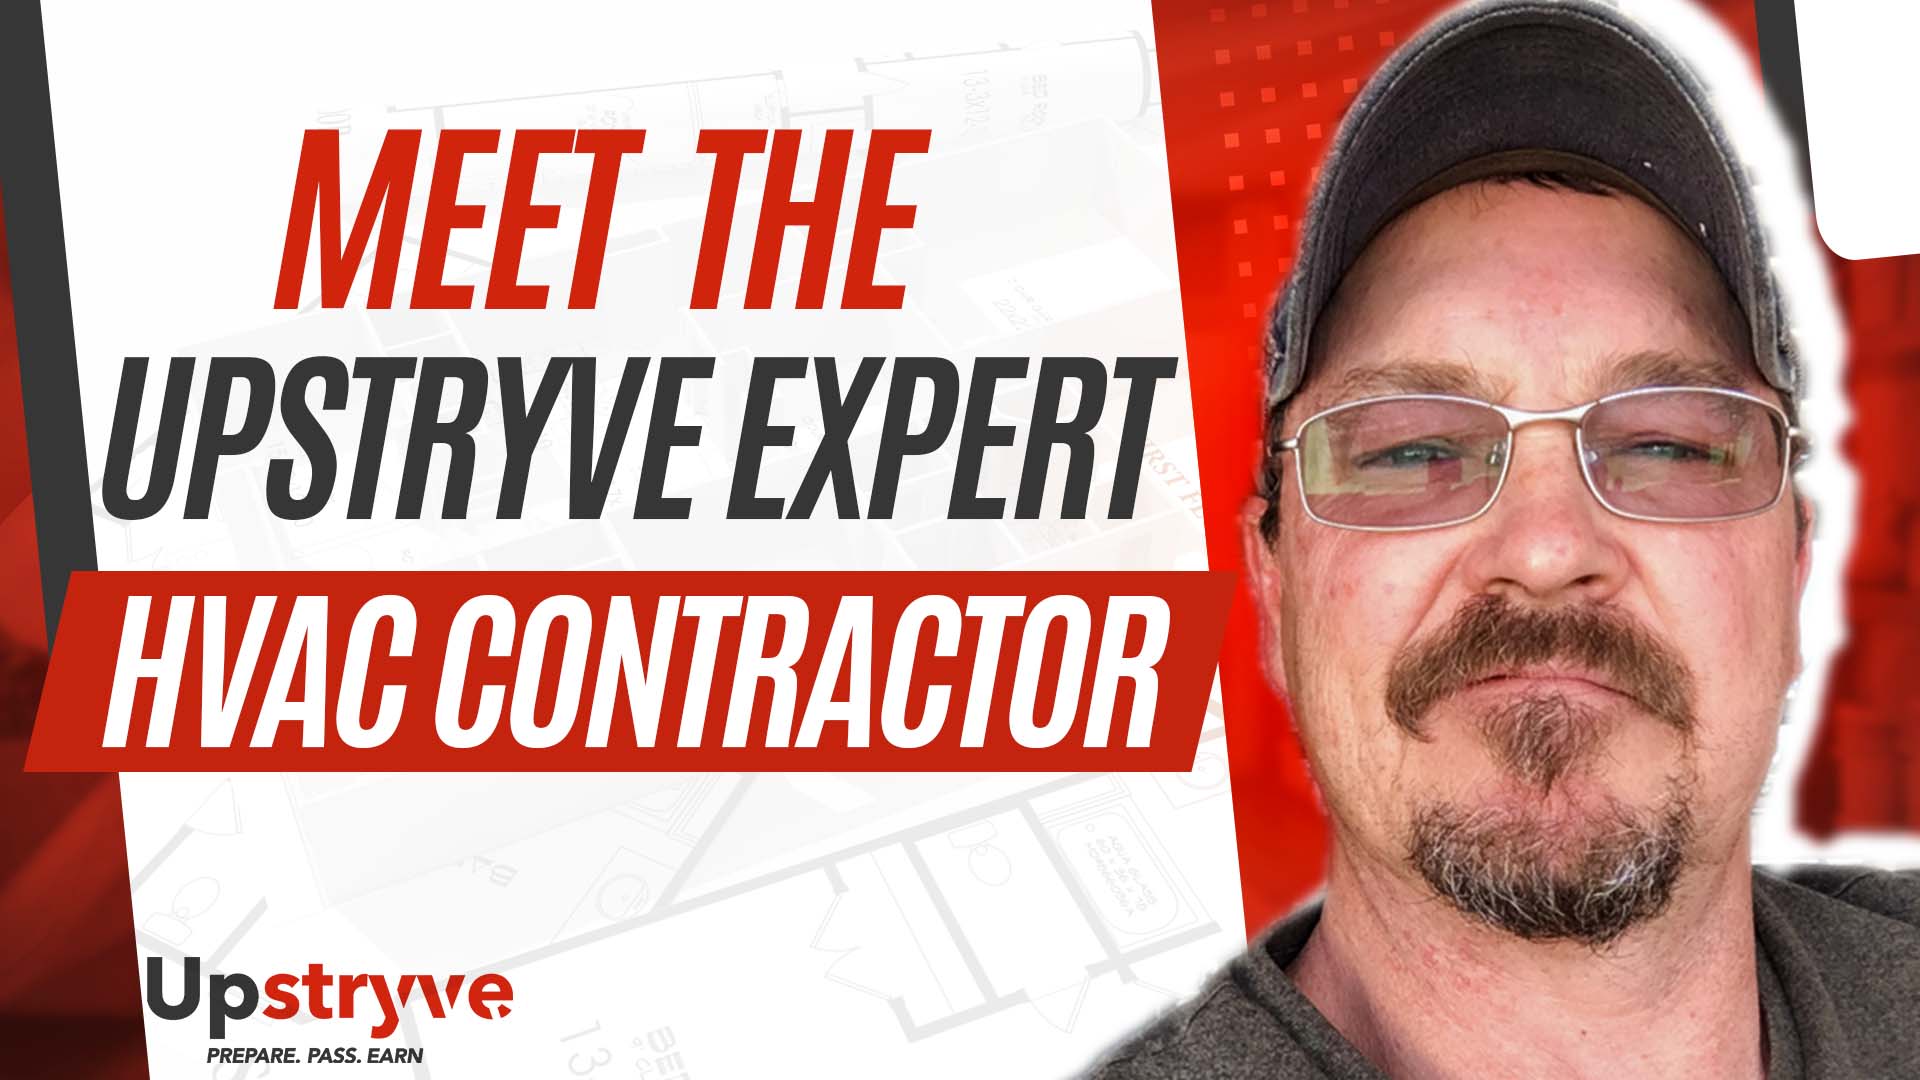 Today we chat with Upstryve tutor HVAC Contractor Zack Tanner. Zack has been in the HVAC field for just under 30 years. He's helped train students on becoming HVAC certified for just as long.  In addition to his HVAC experience, he has a Texas Forklift operator's license and a Scissor Lift safety license. 

EXPERIENCE:
Refrigeration Type I, II, III Certificate

Recycle/Reclamation Certificate

Railroad Commission LPG License

Forklift Operators License

Scissor Lift Safety License

EDUCATION:
GED, 1988

LANGUAGE: 
English

Schedule a session with Zack: https://www.upstryve.com
Upstryve Book Store: https://store.upstryve.com